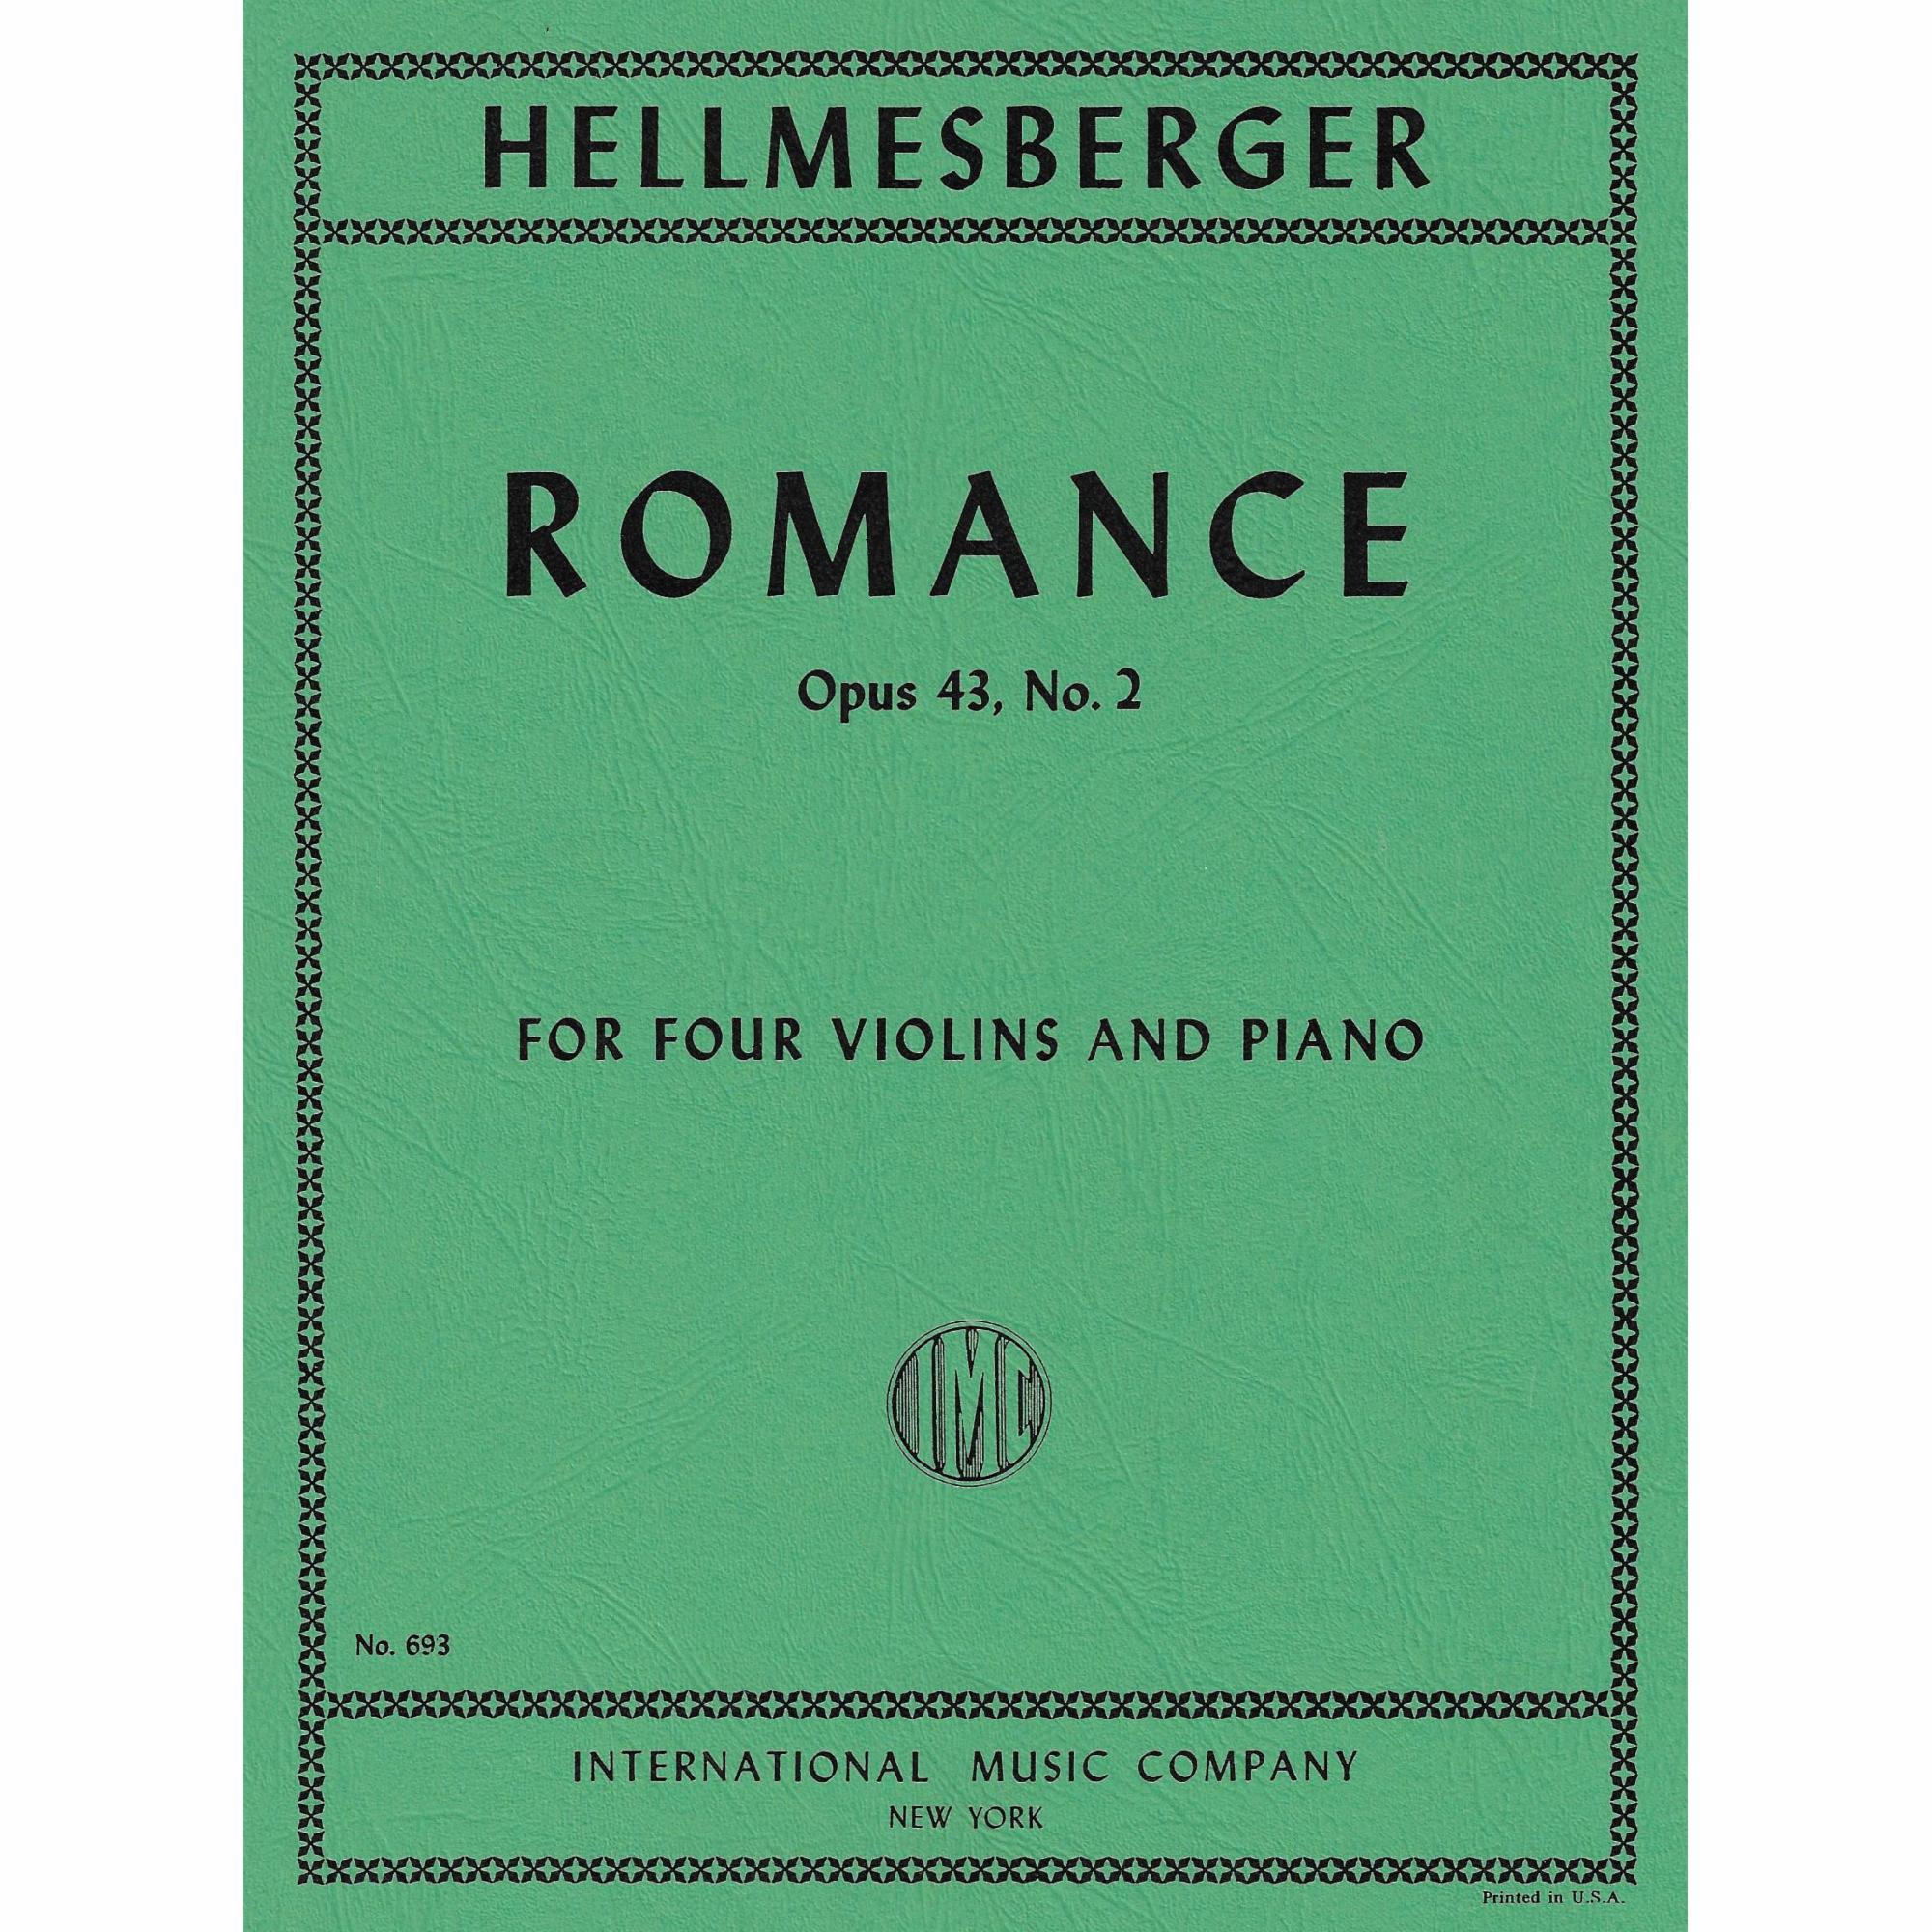 Hellmesberger -- Romance, Op. 43, No. 2 for Four Violins and Piano